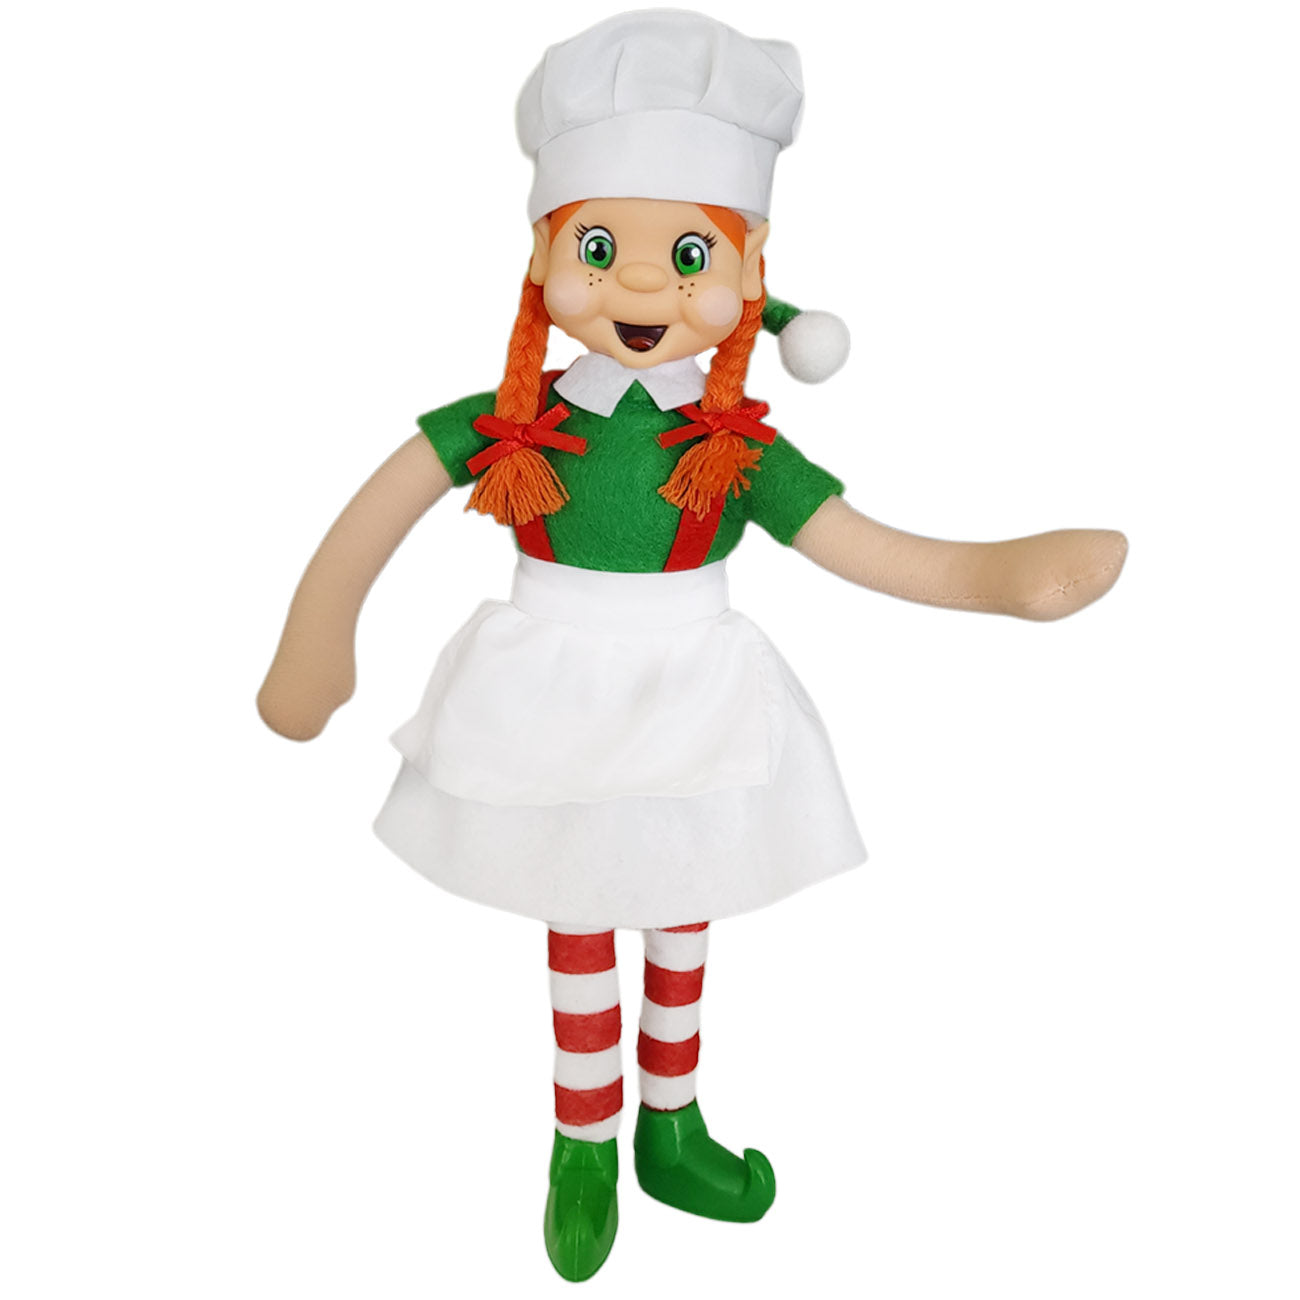 Elf wearing a chef elf outfit